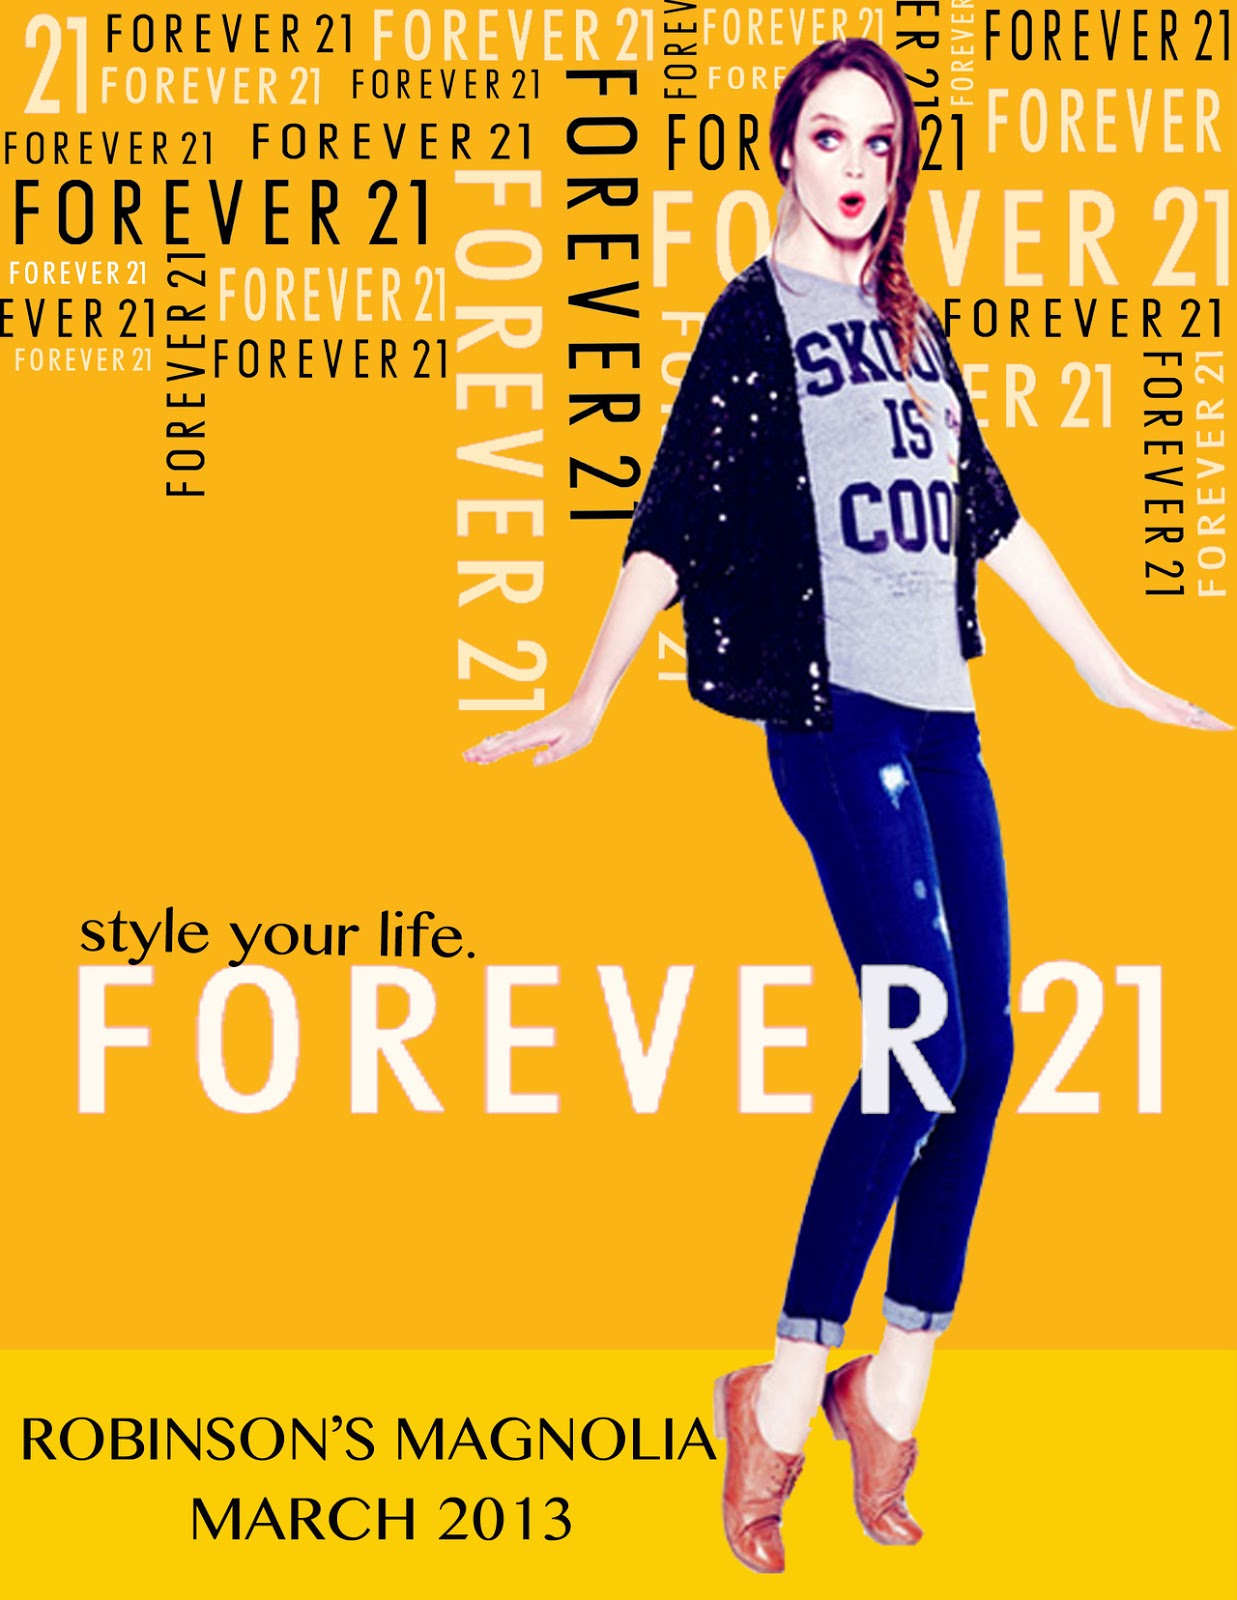 ... World: Advertising Copy Layout and Writing: Forever 21 mock ad